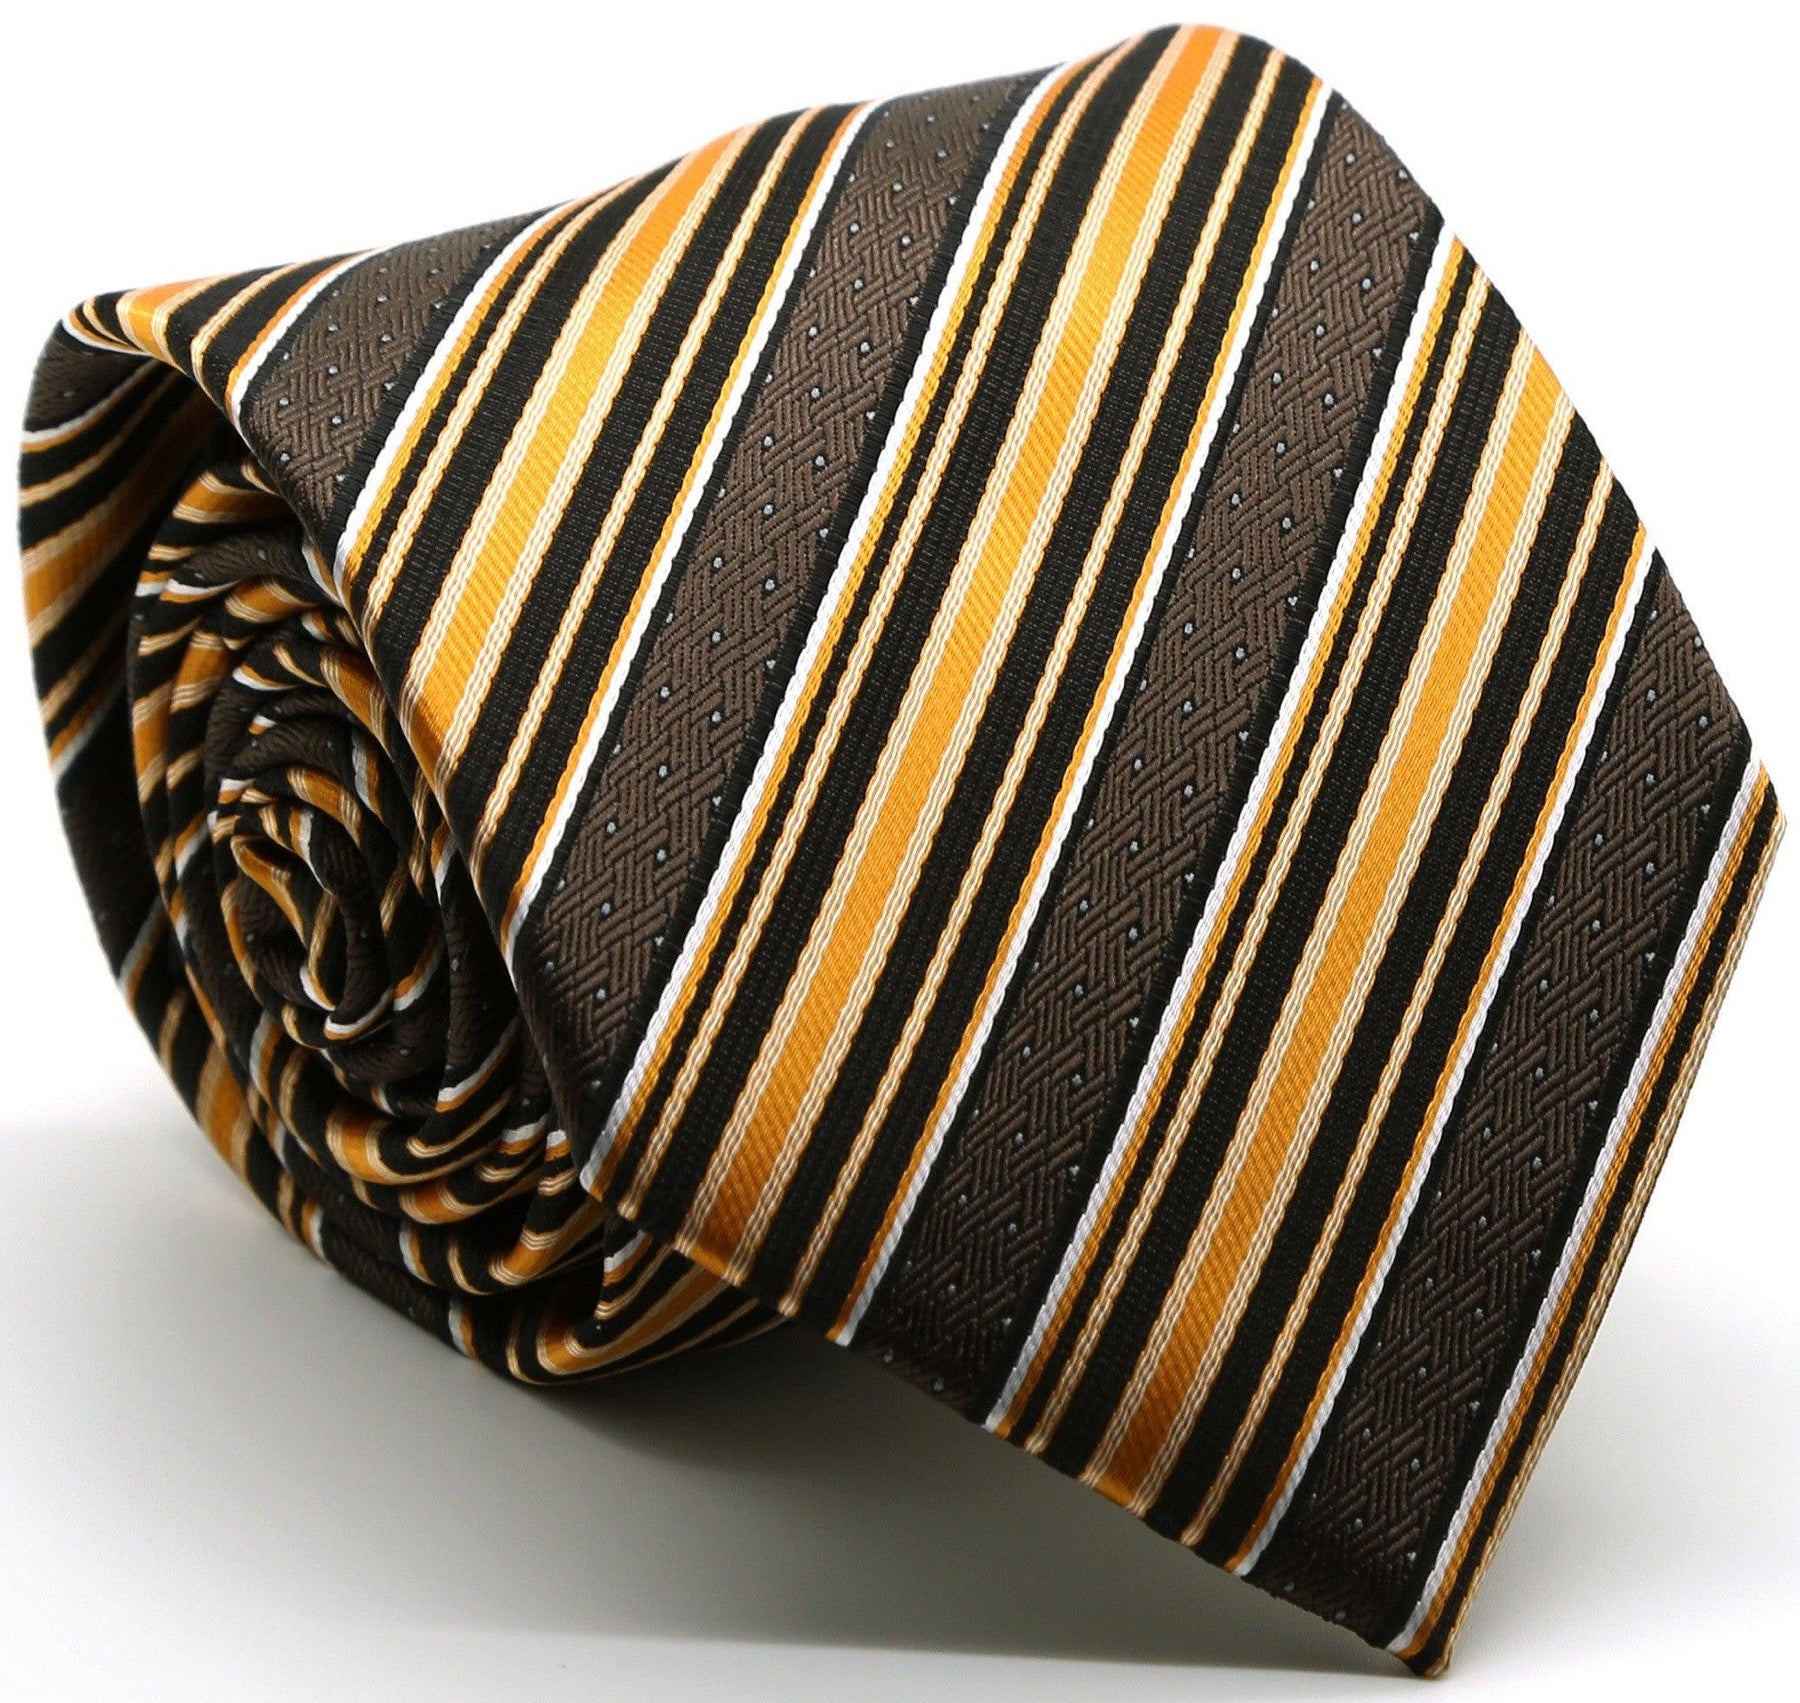 Premium Dotted Striped Ties